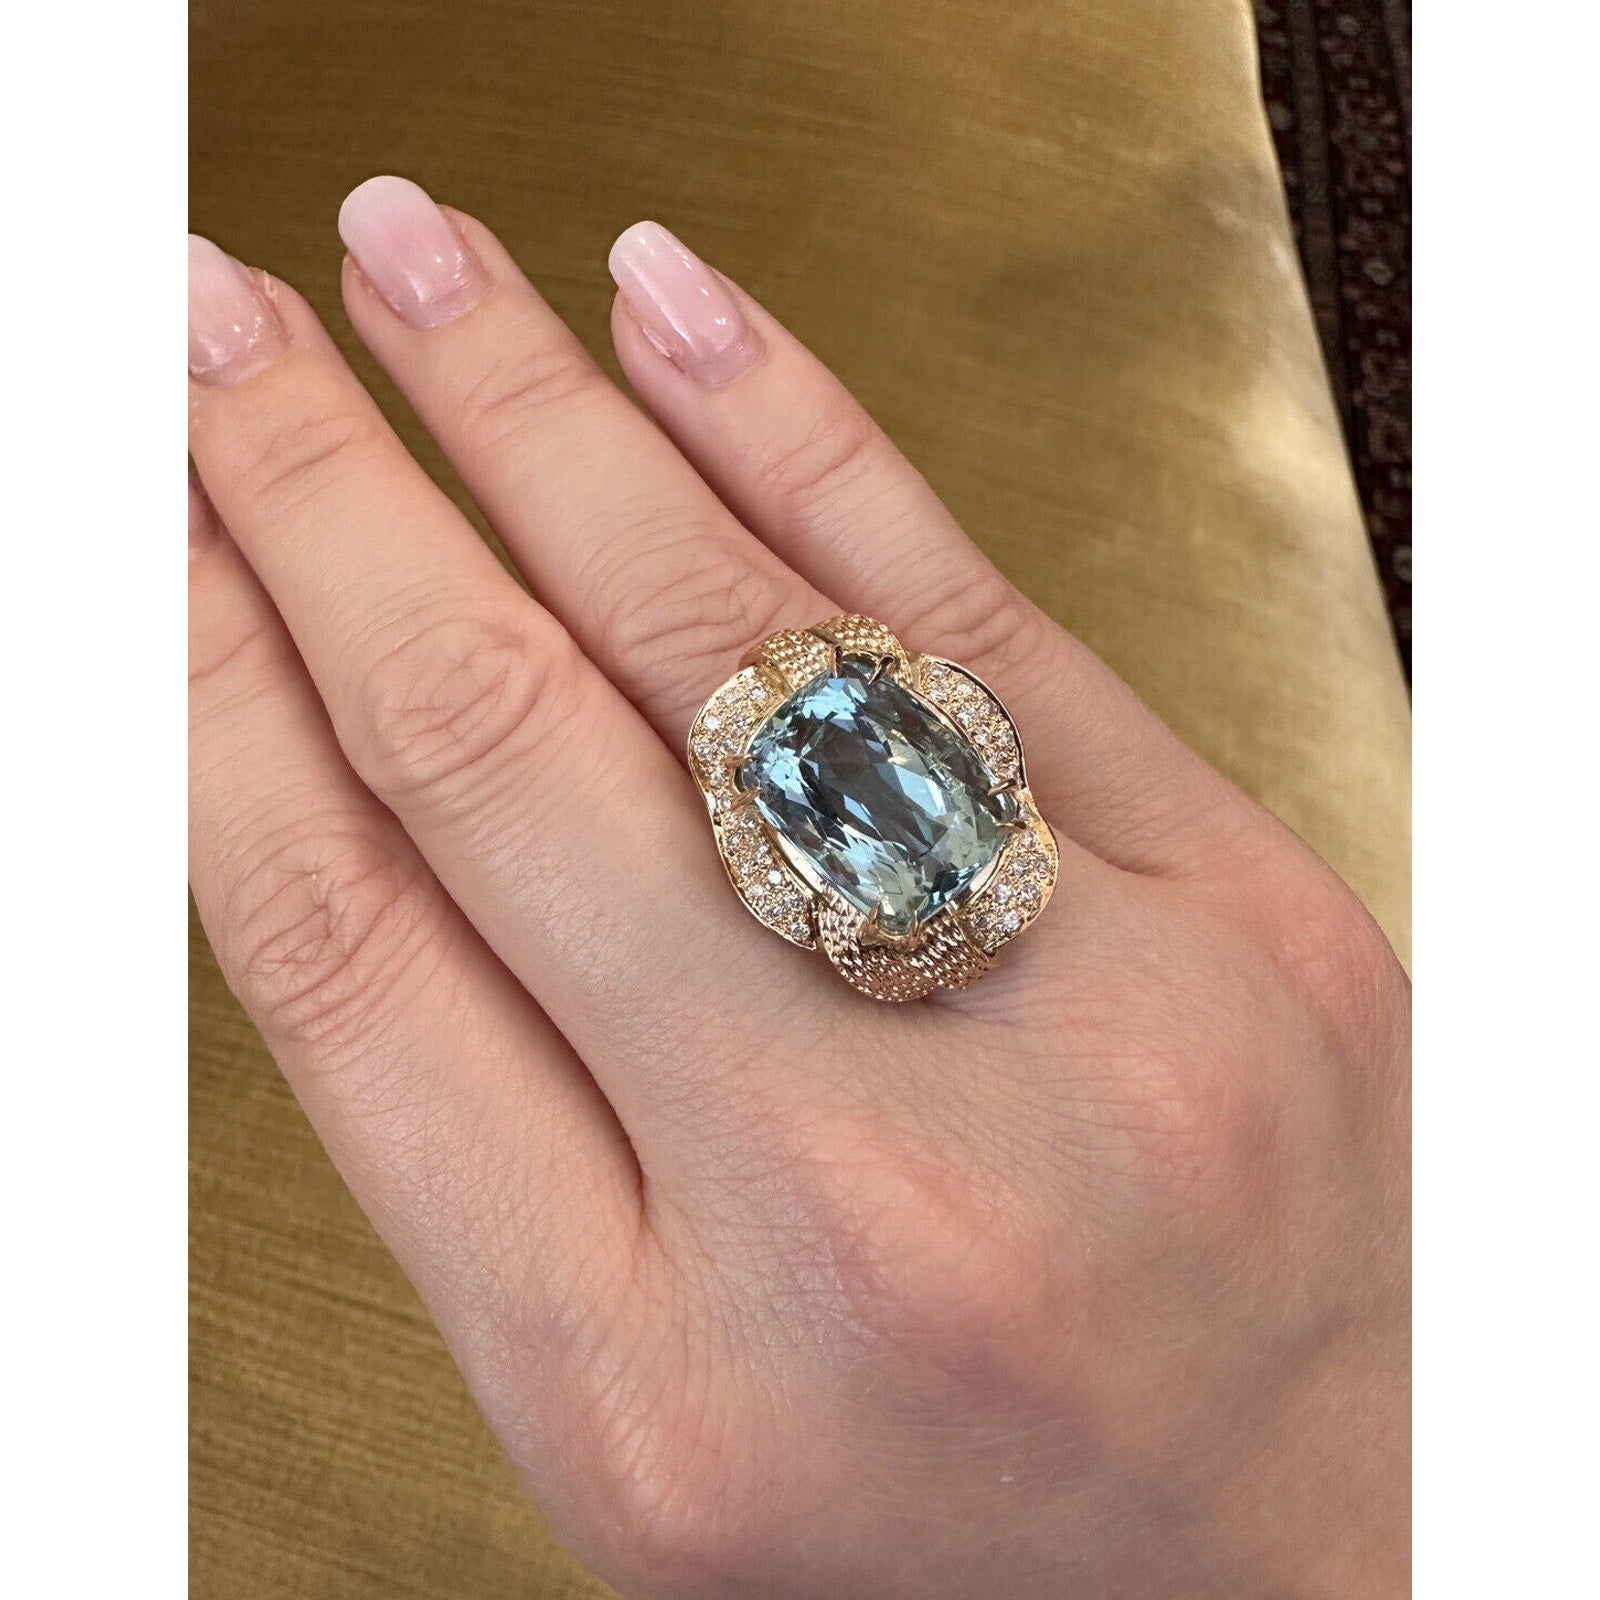 13.76 ct Aquamarine and Diamond Cocktail Ring in 18k Yellow Gold - HM2484AE